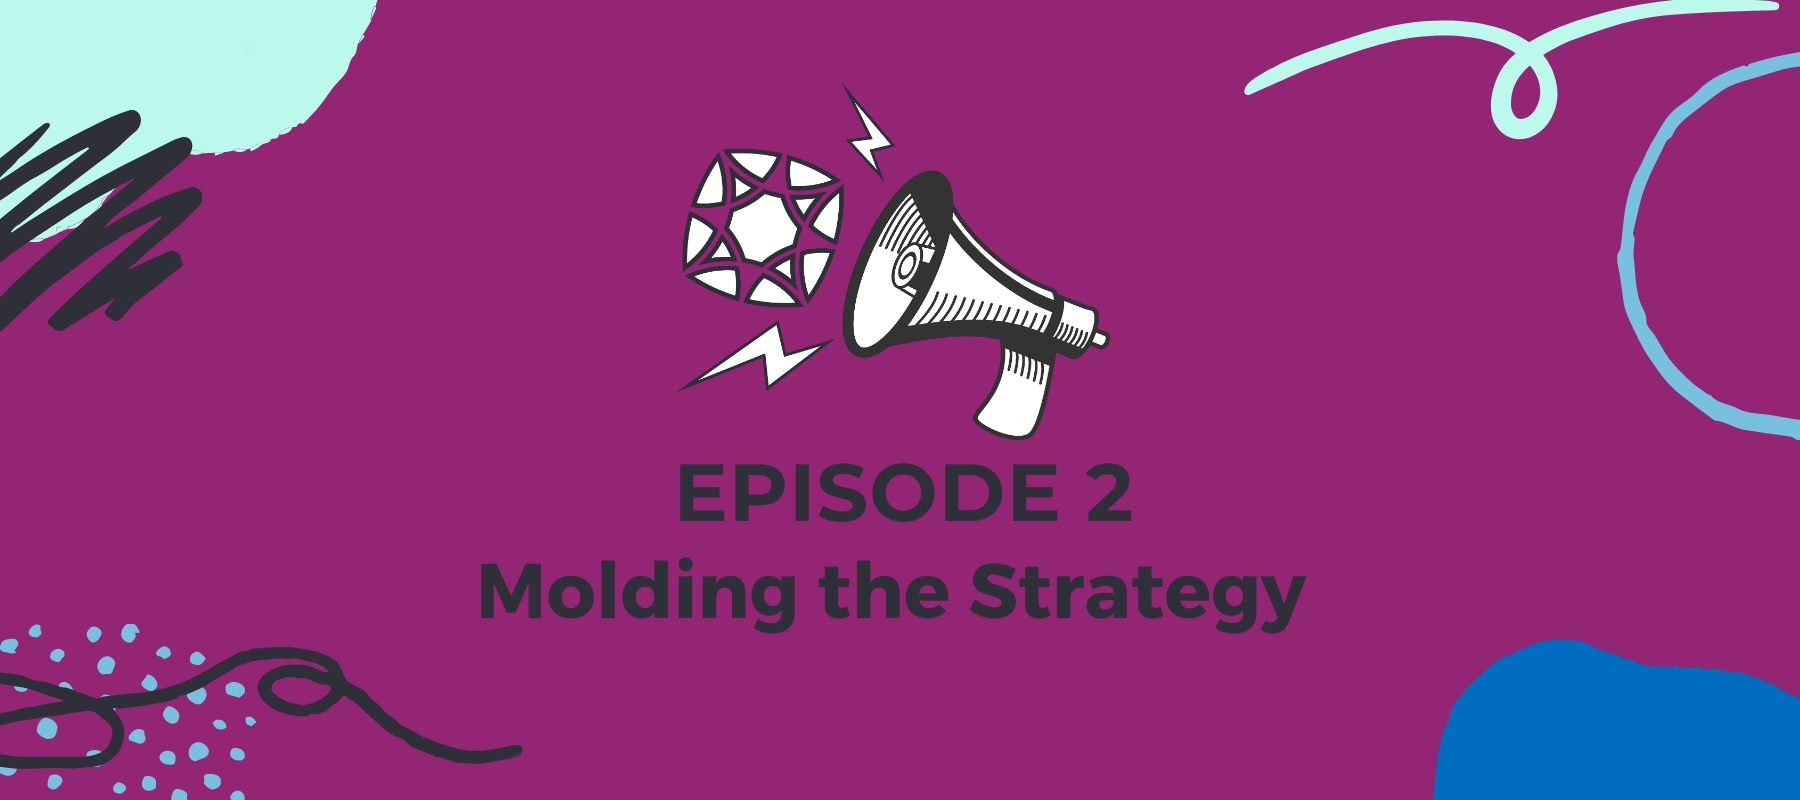 Episode 2: Molding the Strategy.